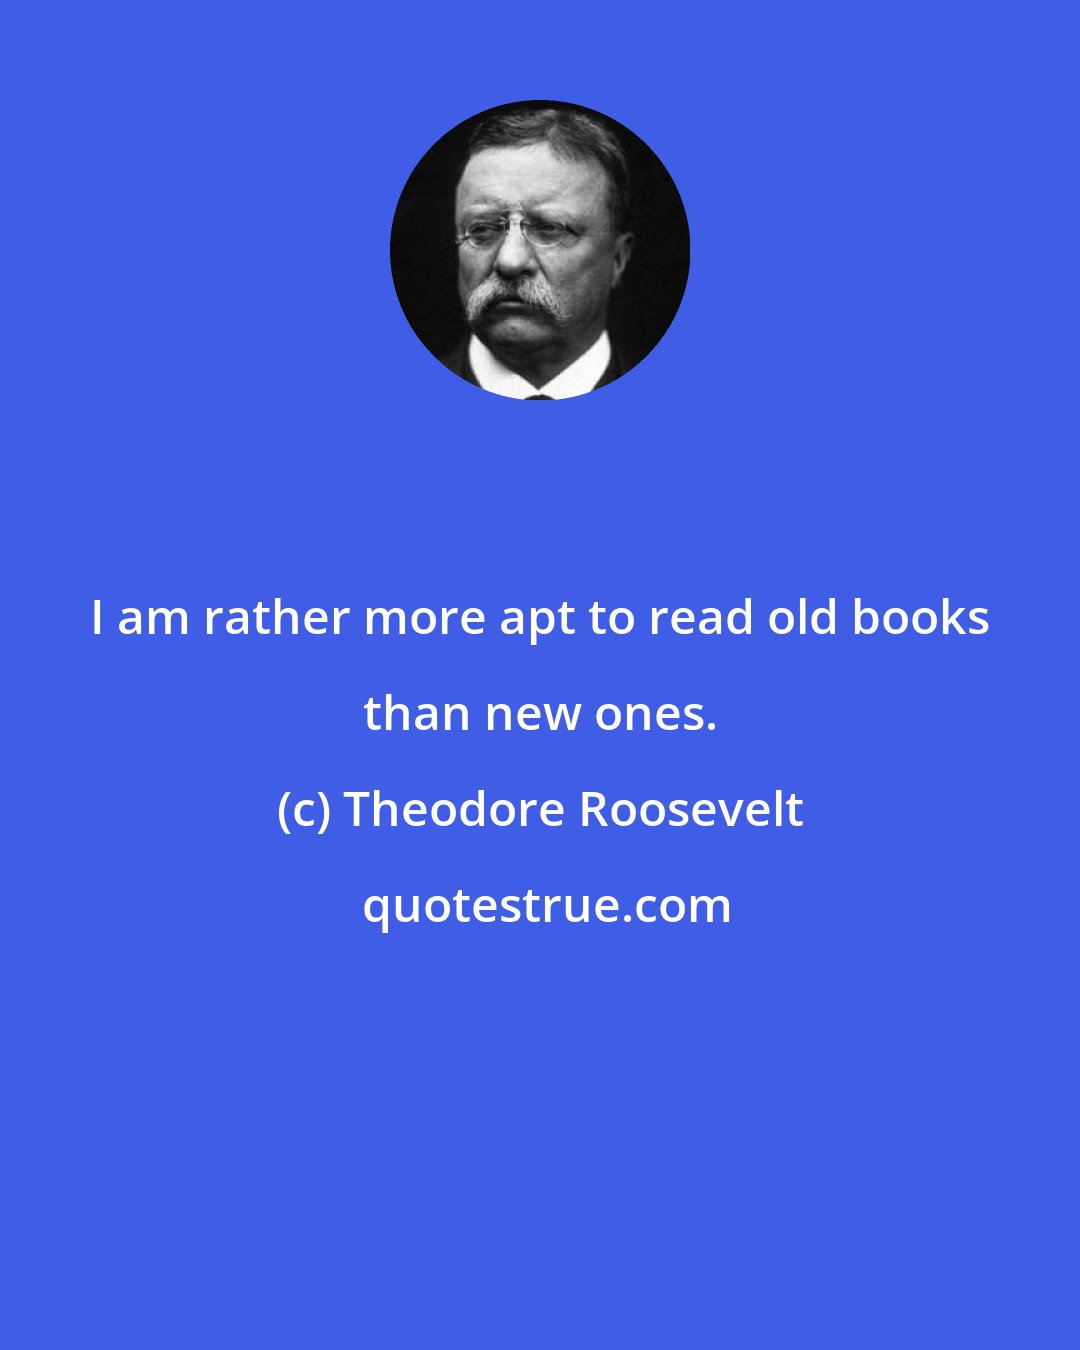 Theodore Roosevelt: I am rather more apt to read old books than new ones.